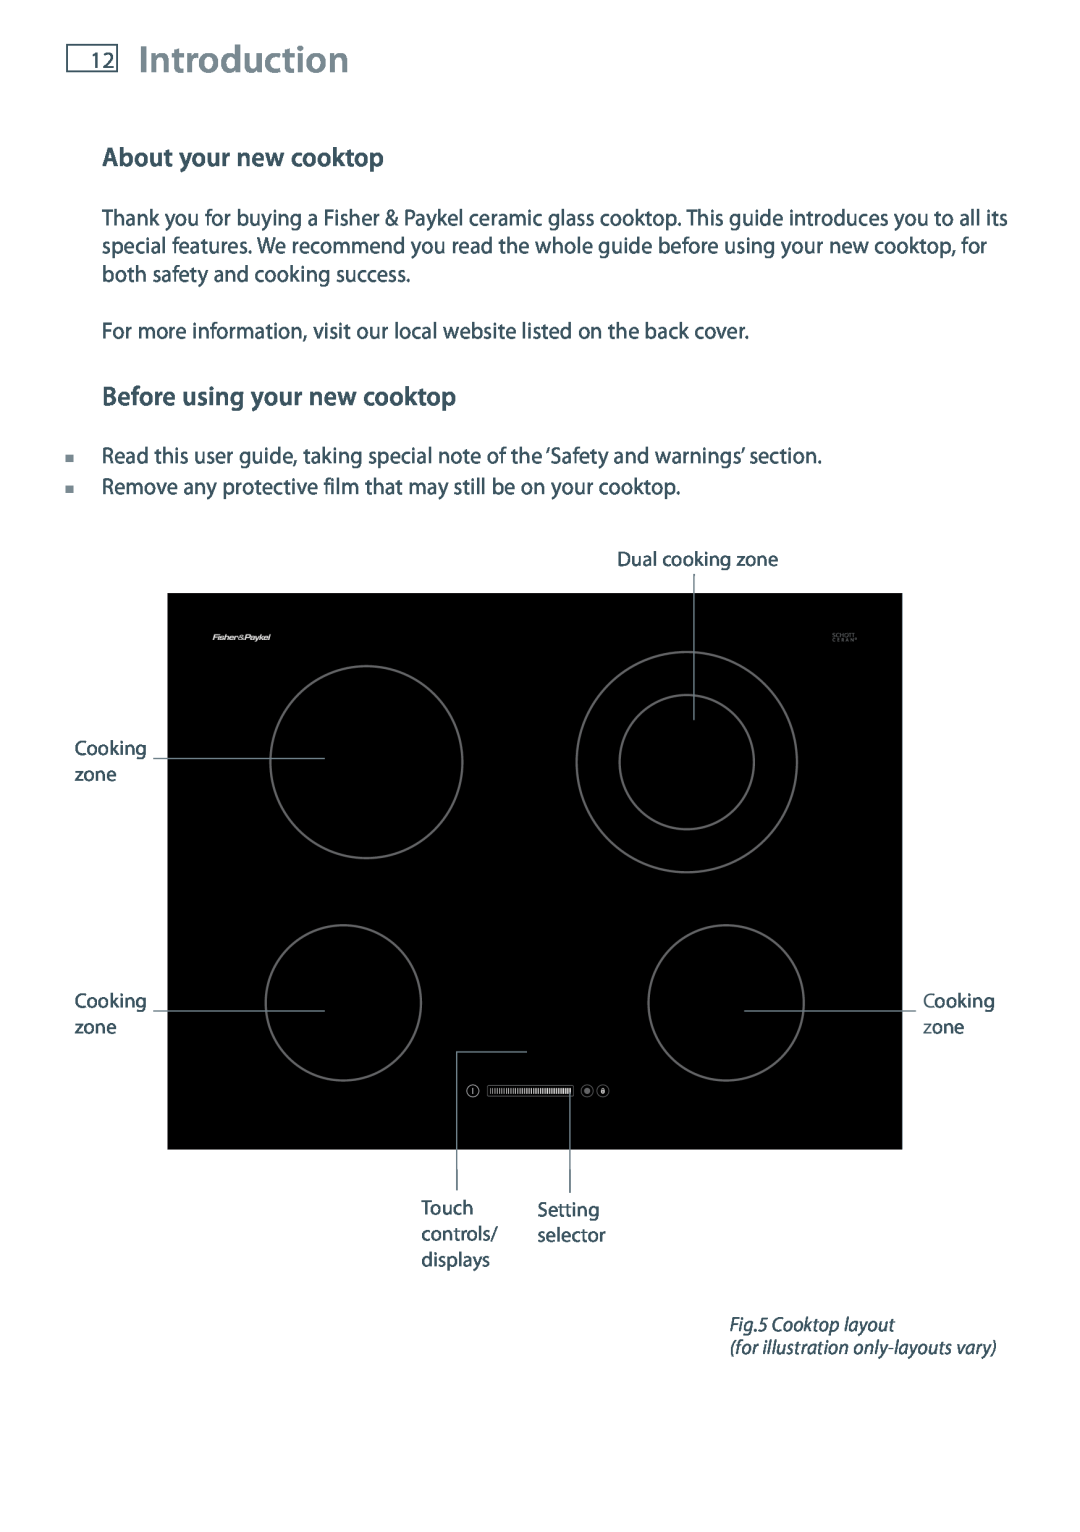 Fisher & Paykel CE754DT, CE604DT, CE704DT Introduction, About your new cooktop, Before using your new cooktop 